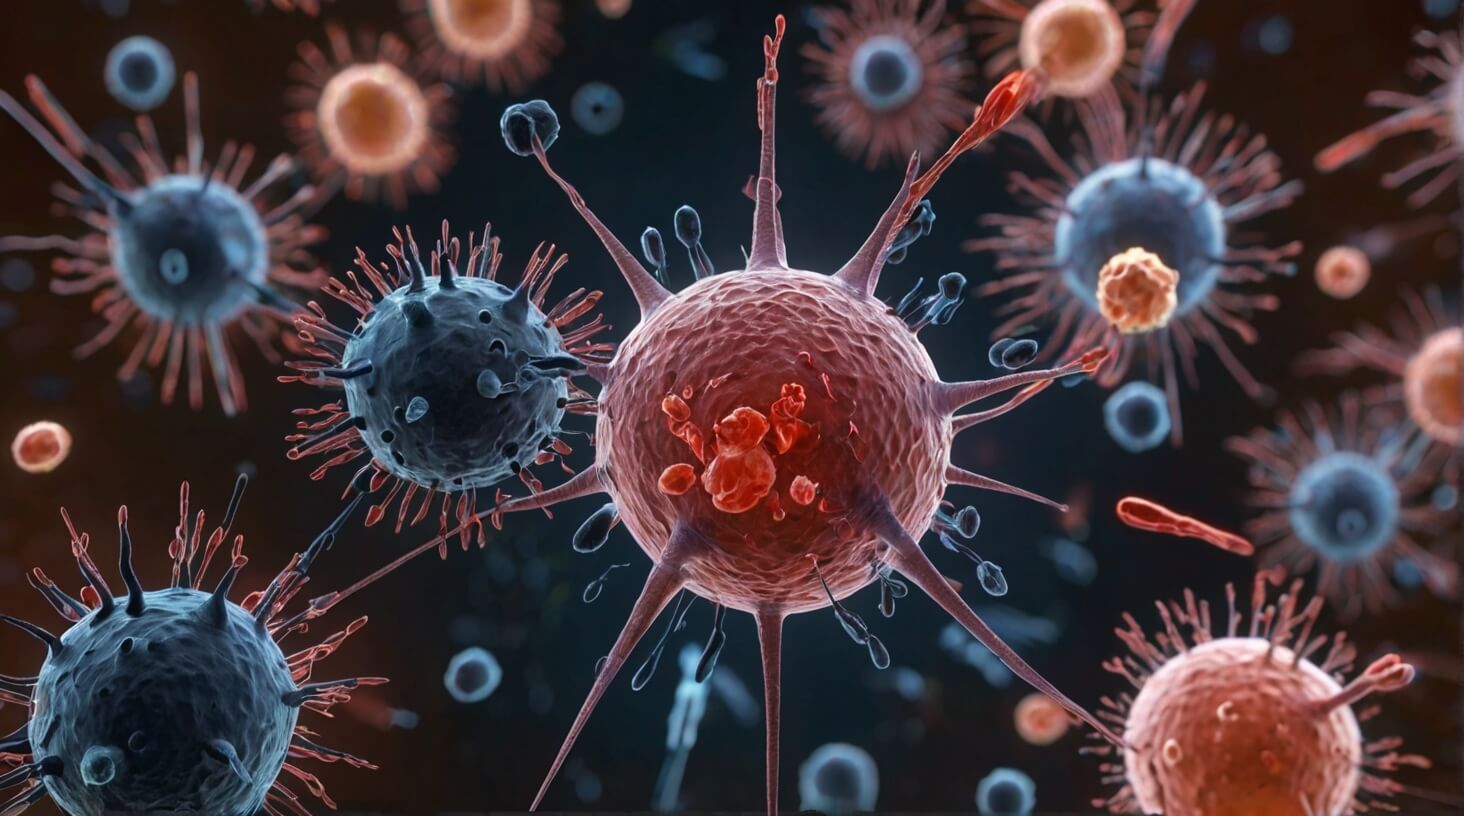 Illustration depicting the diverse functions and interactions of immune cells within the body, highlighting the pivotal role they play in maintaining health and combating disease.